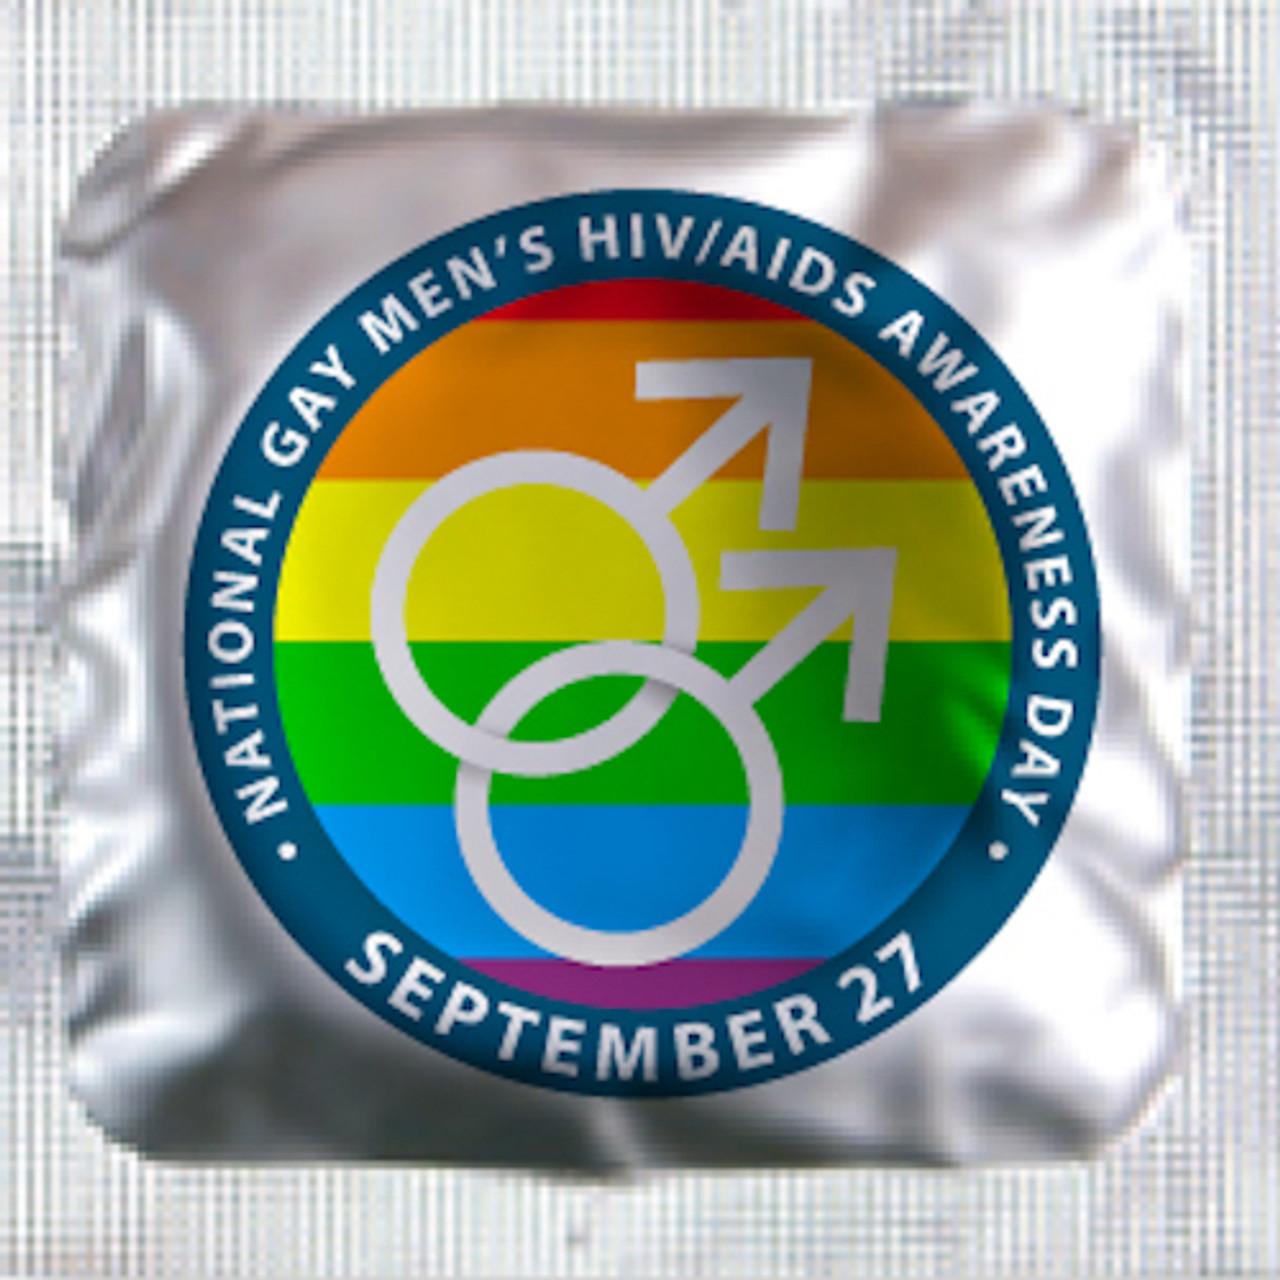 HRSA Recognizes National Gay Men's HIV/AIDS Awareness Day